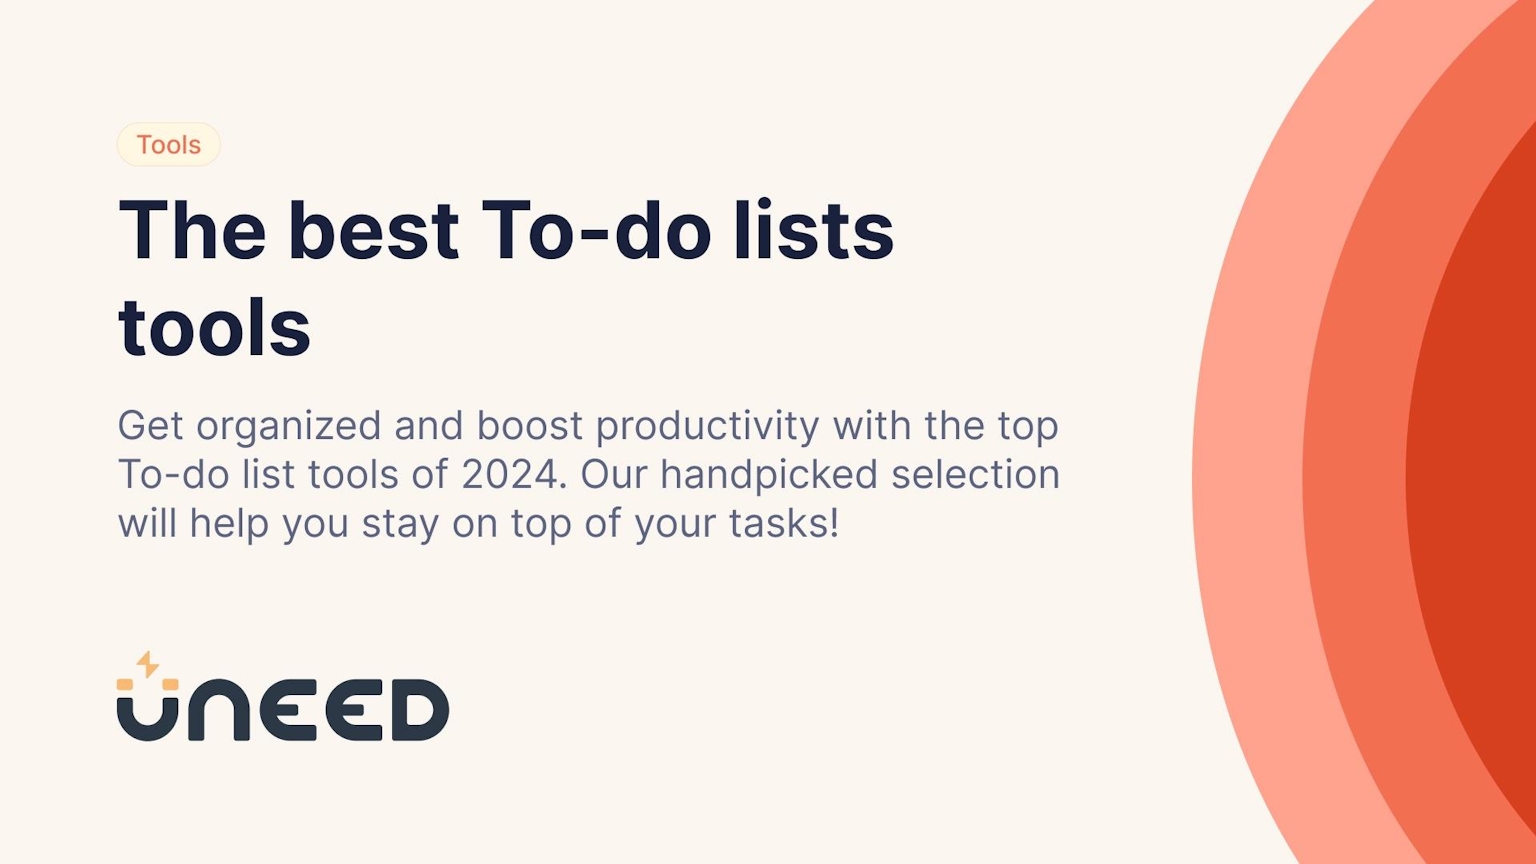 The best To-do lists tools in 2024